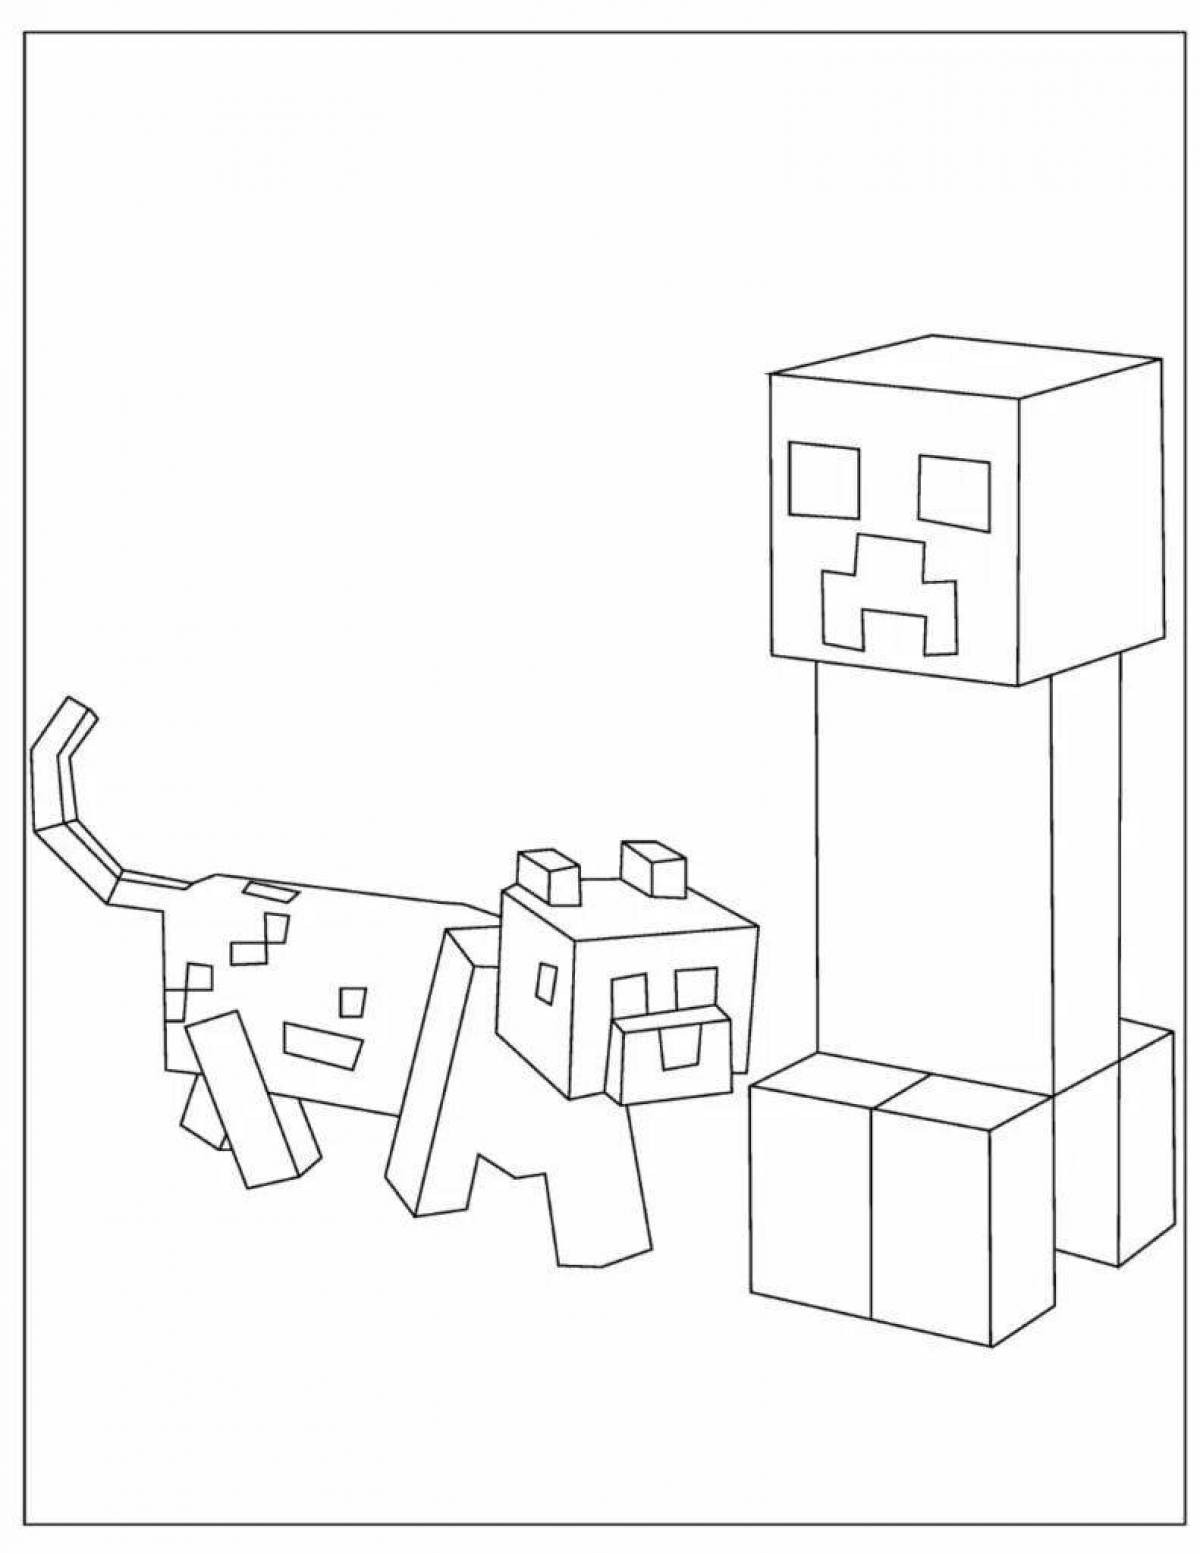 Playful minecraft hare coloring page